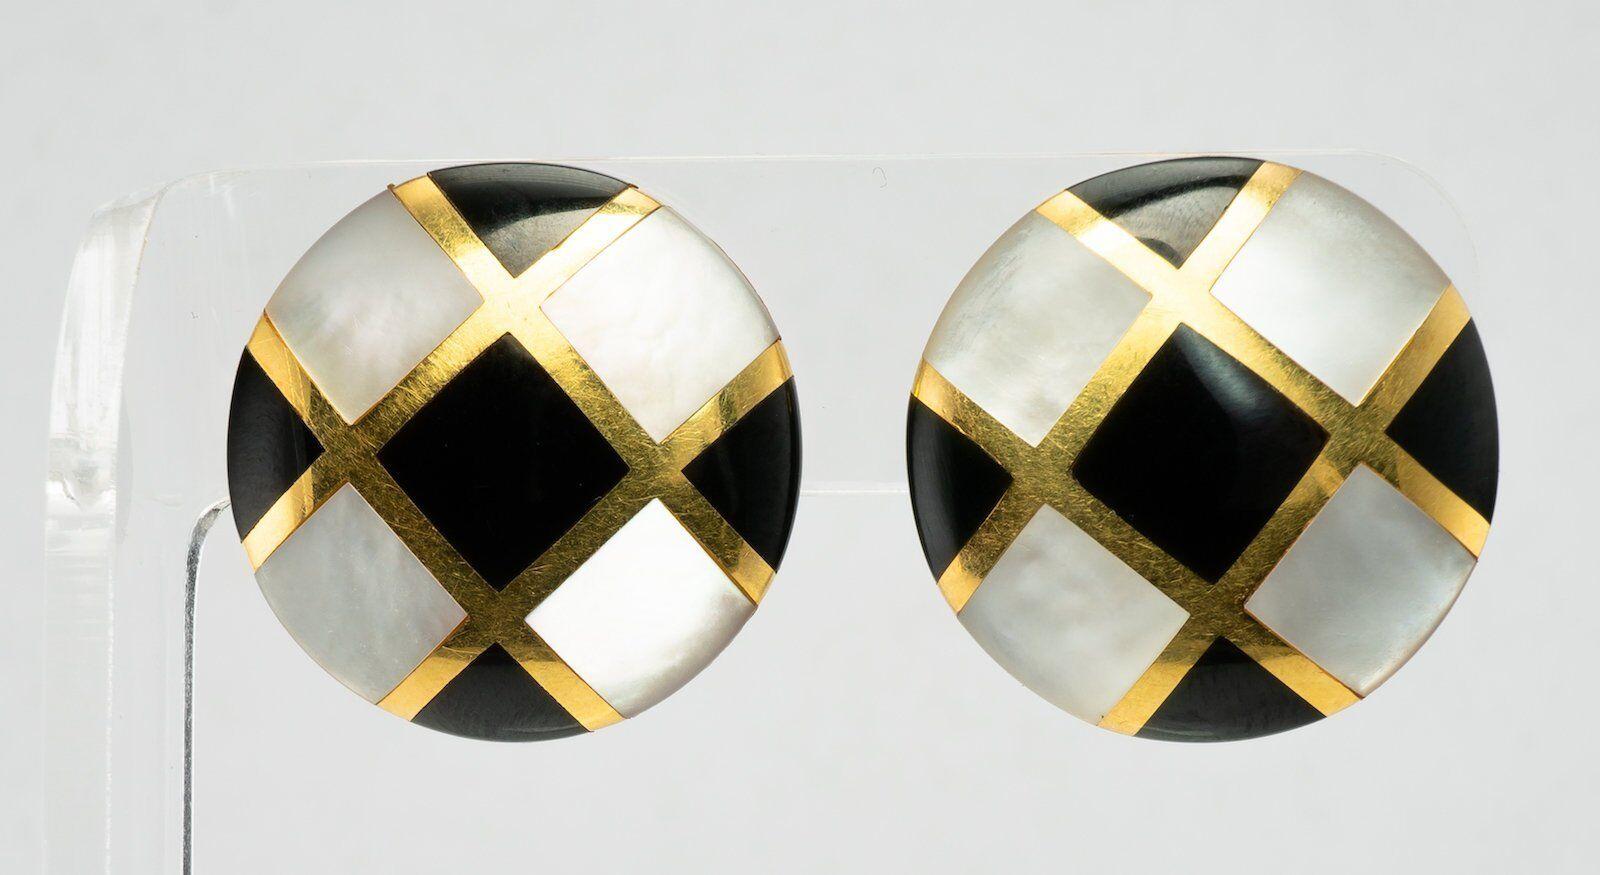 This hard to find authentic Tiffany & Co. earrings are finely crafted in solid 18K Yellow Gold (stamped).
Each earring is inlaid with genuine Black Onyx and Mother of Pearl. 
The earrings measure 26mm x 5mm thick. They are equipped with long posts